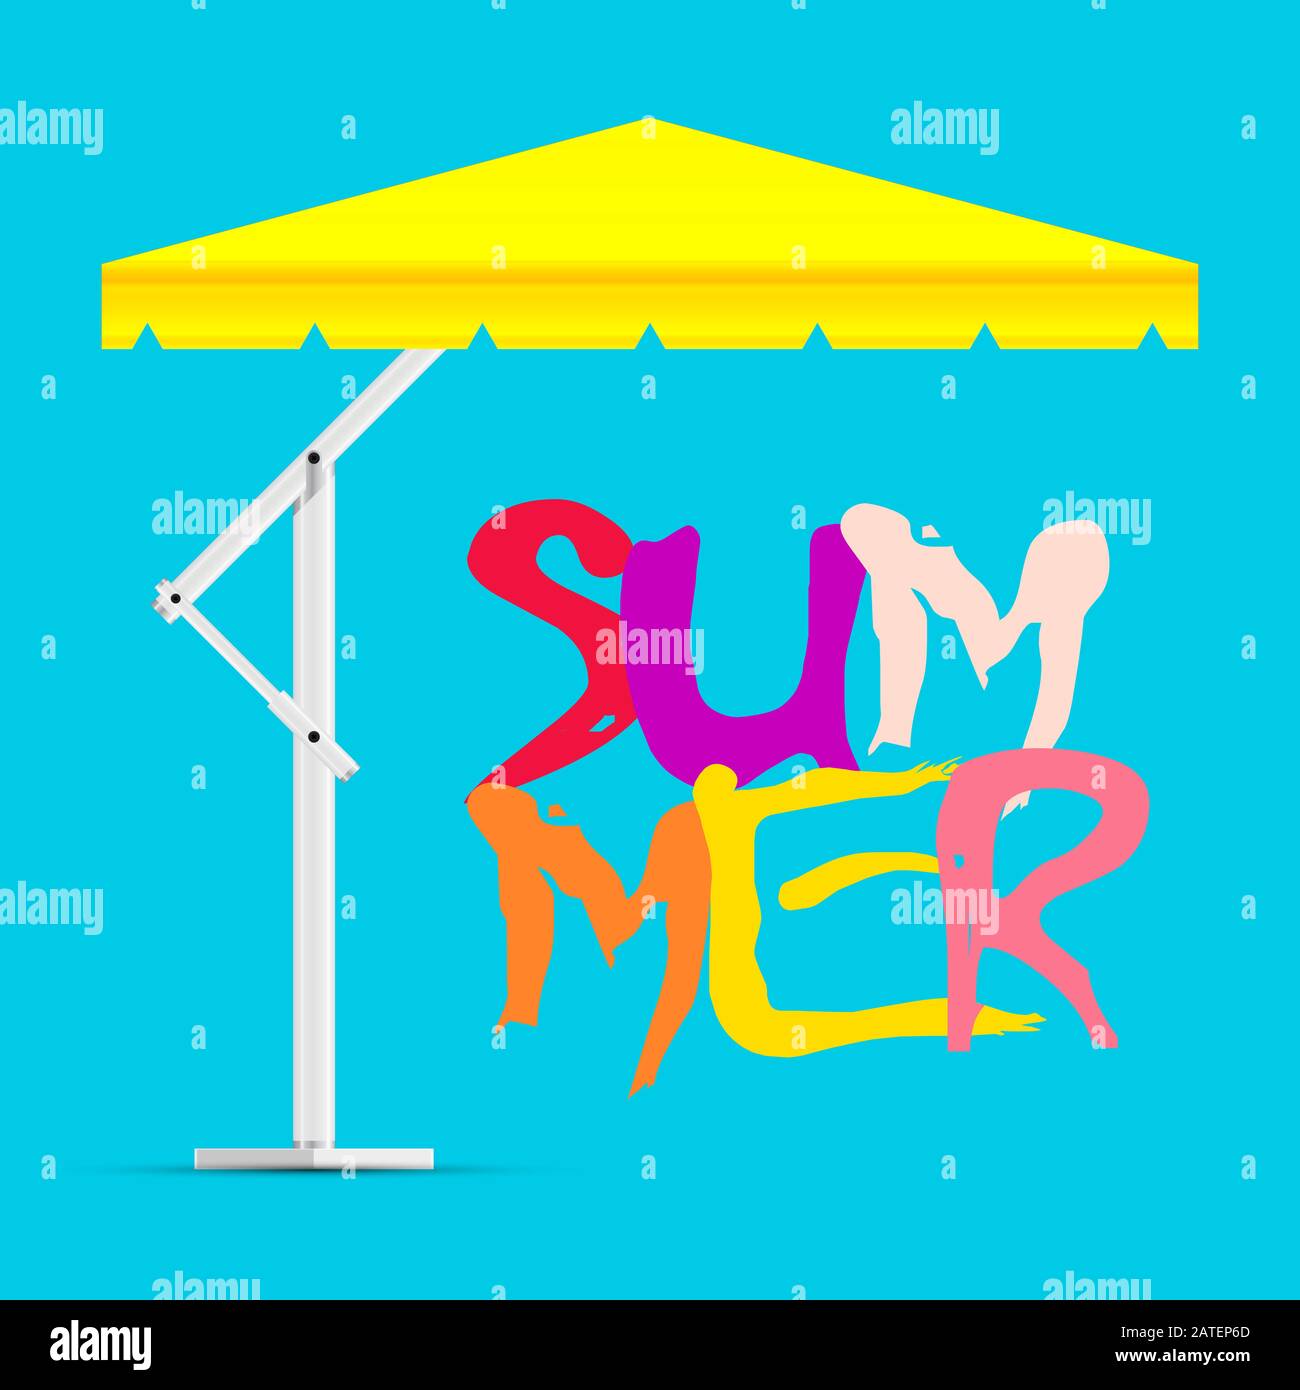 Beach umbrella summer background. illustration. Yellow awning tent and summer lettering on a sky blue background. Stock Photo